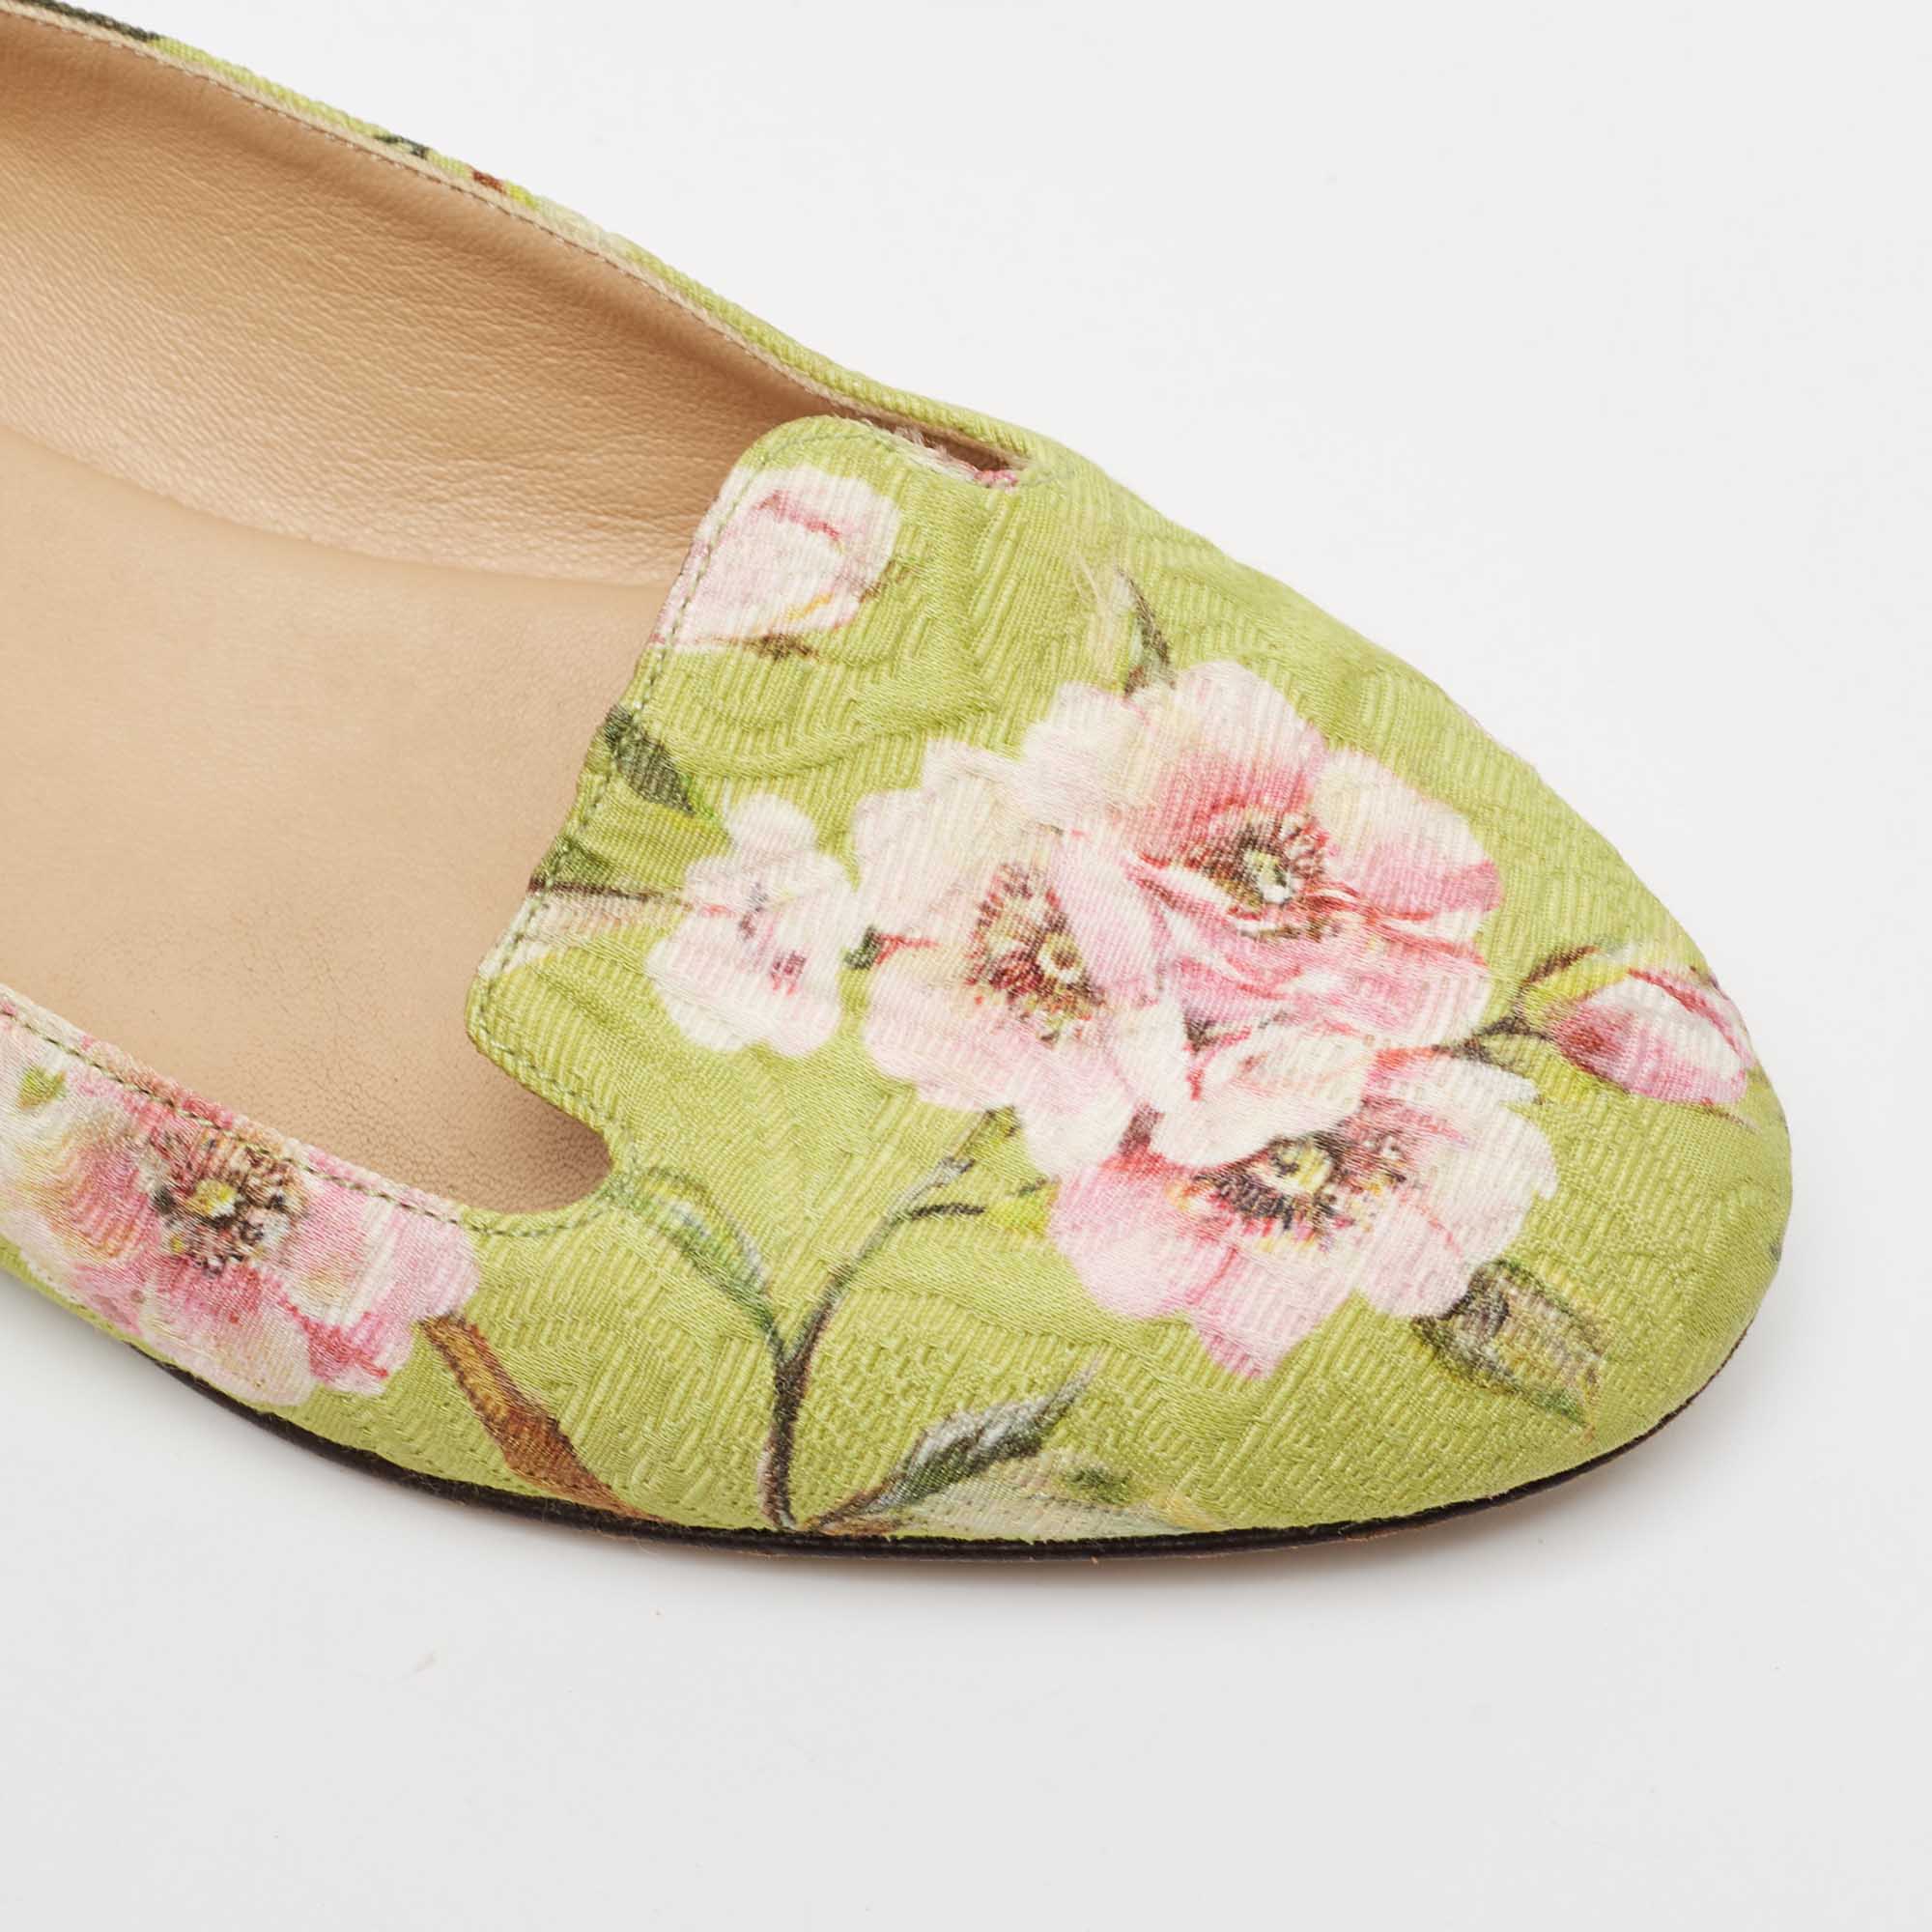 Dolce & Gabbana Multicolor Floral Print Brocade Flat Smoking Slippers Size 36